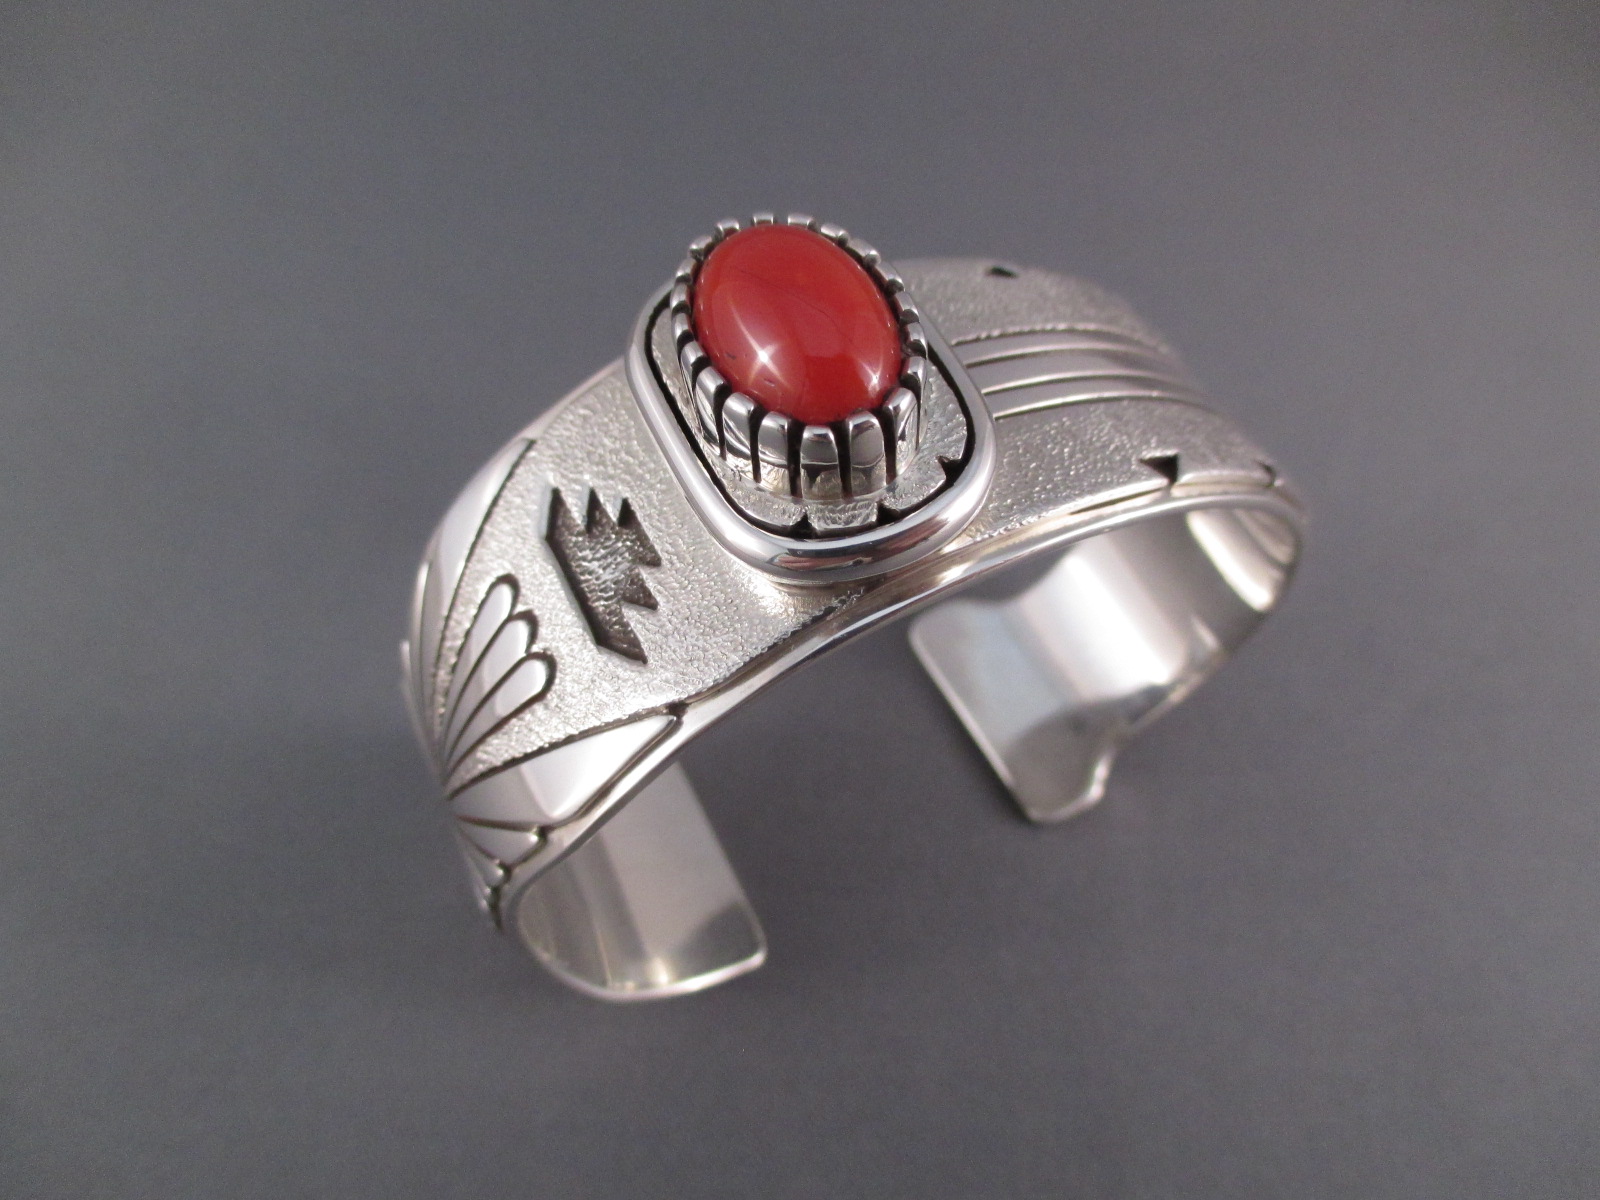 Sterling Silver & Coral Cuff Bracelet by Native American Navajo Indian jewelry artist, Leo Yazzie $1,250-